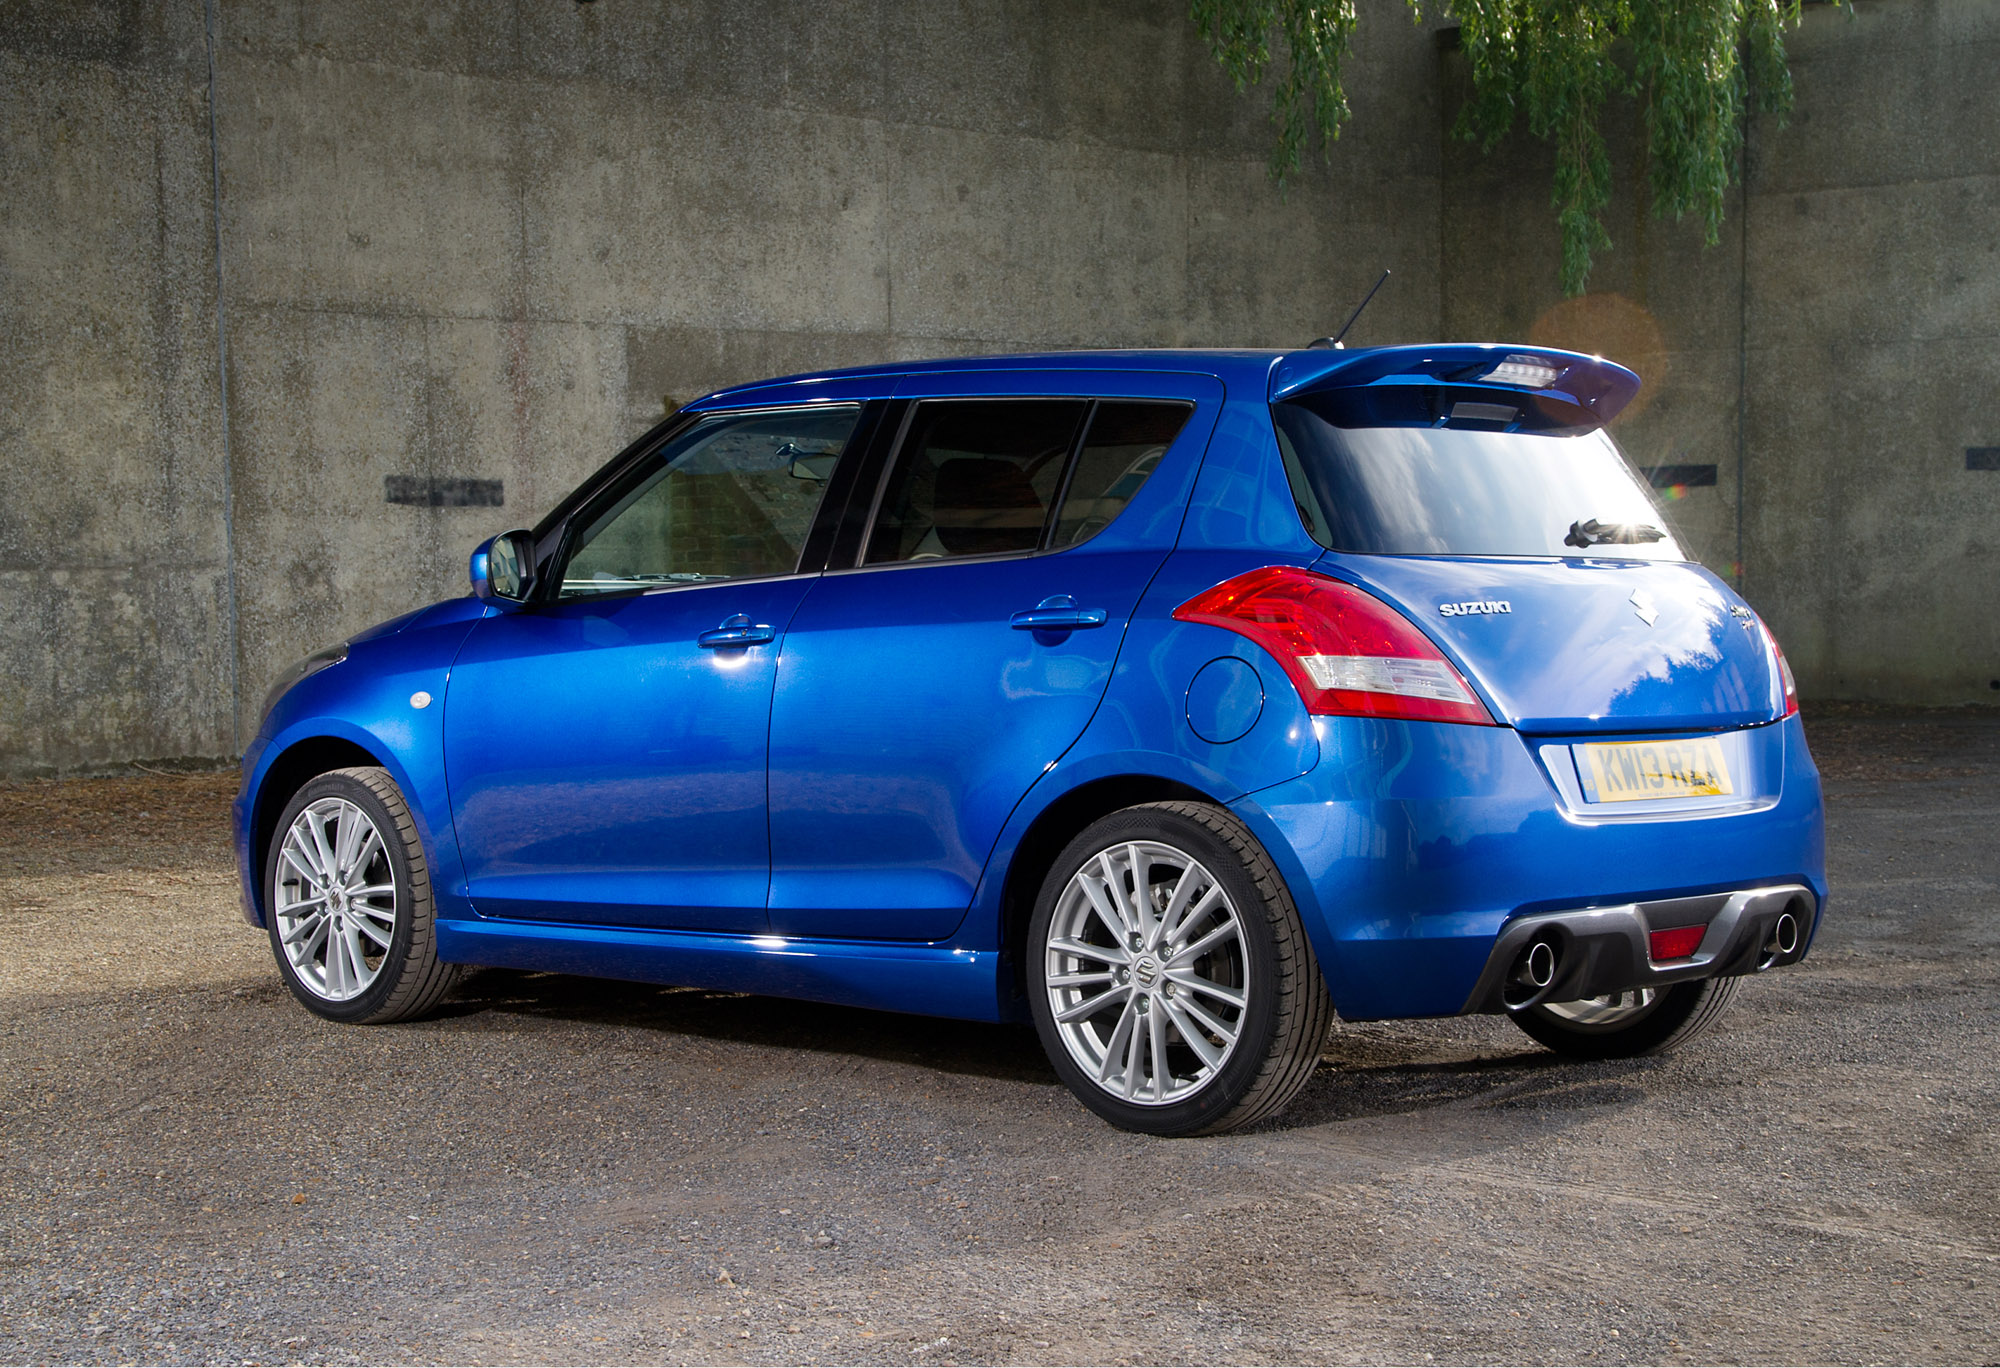 Suzuki Swift Sport Review Prices Specs And 0 60 Time Evo